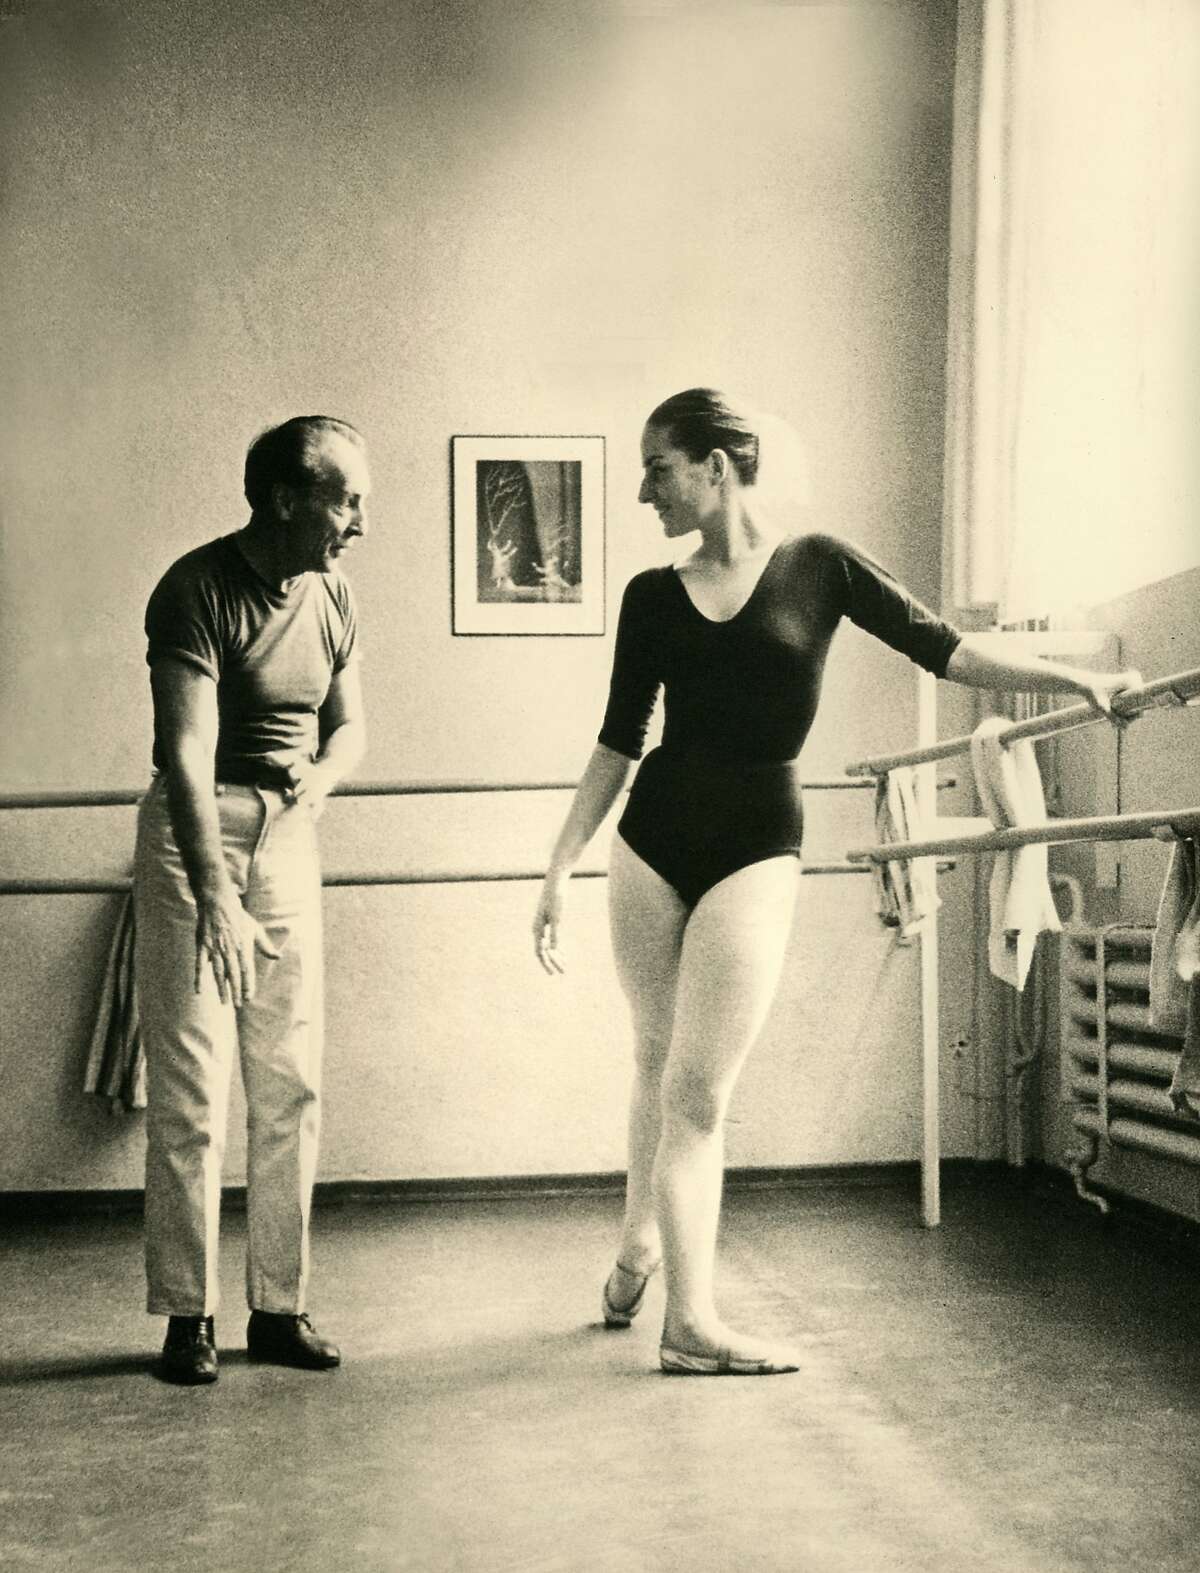 George Balanchine and Tanaquil Le Clercq in, "Afternoon of the Faun: Tanaquil Le Clercq."